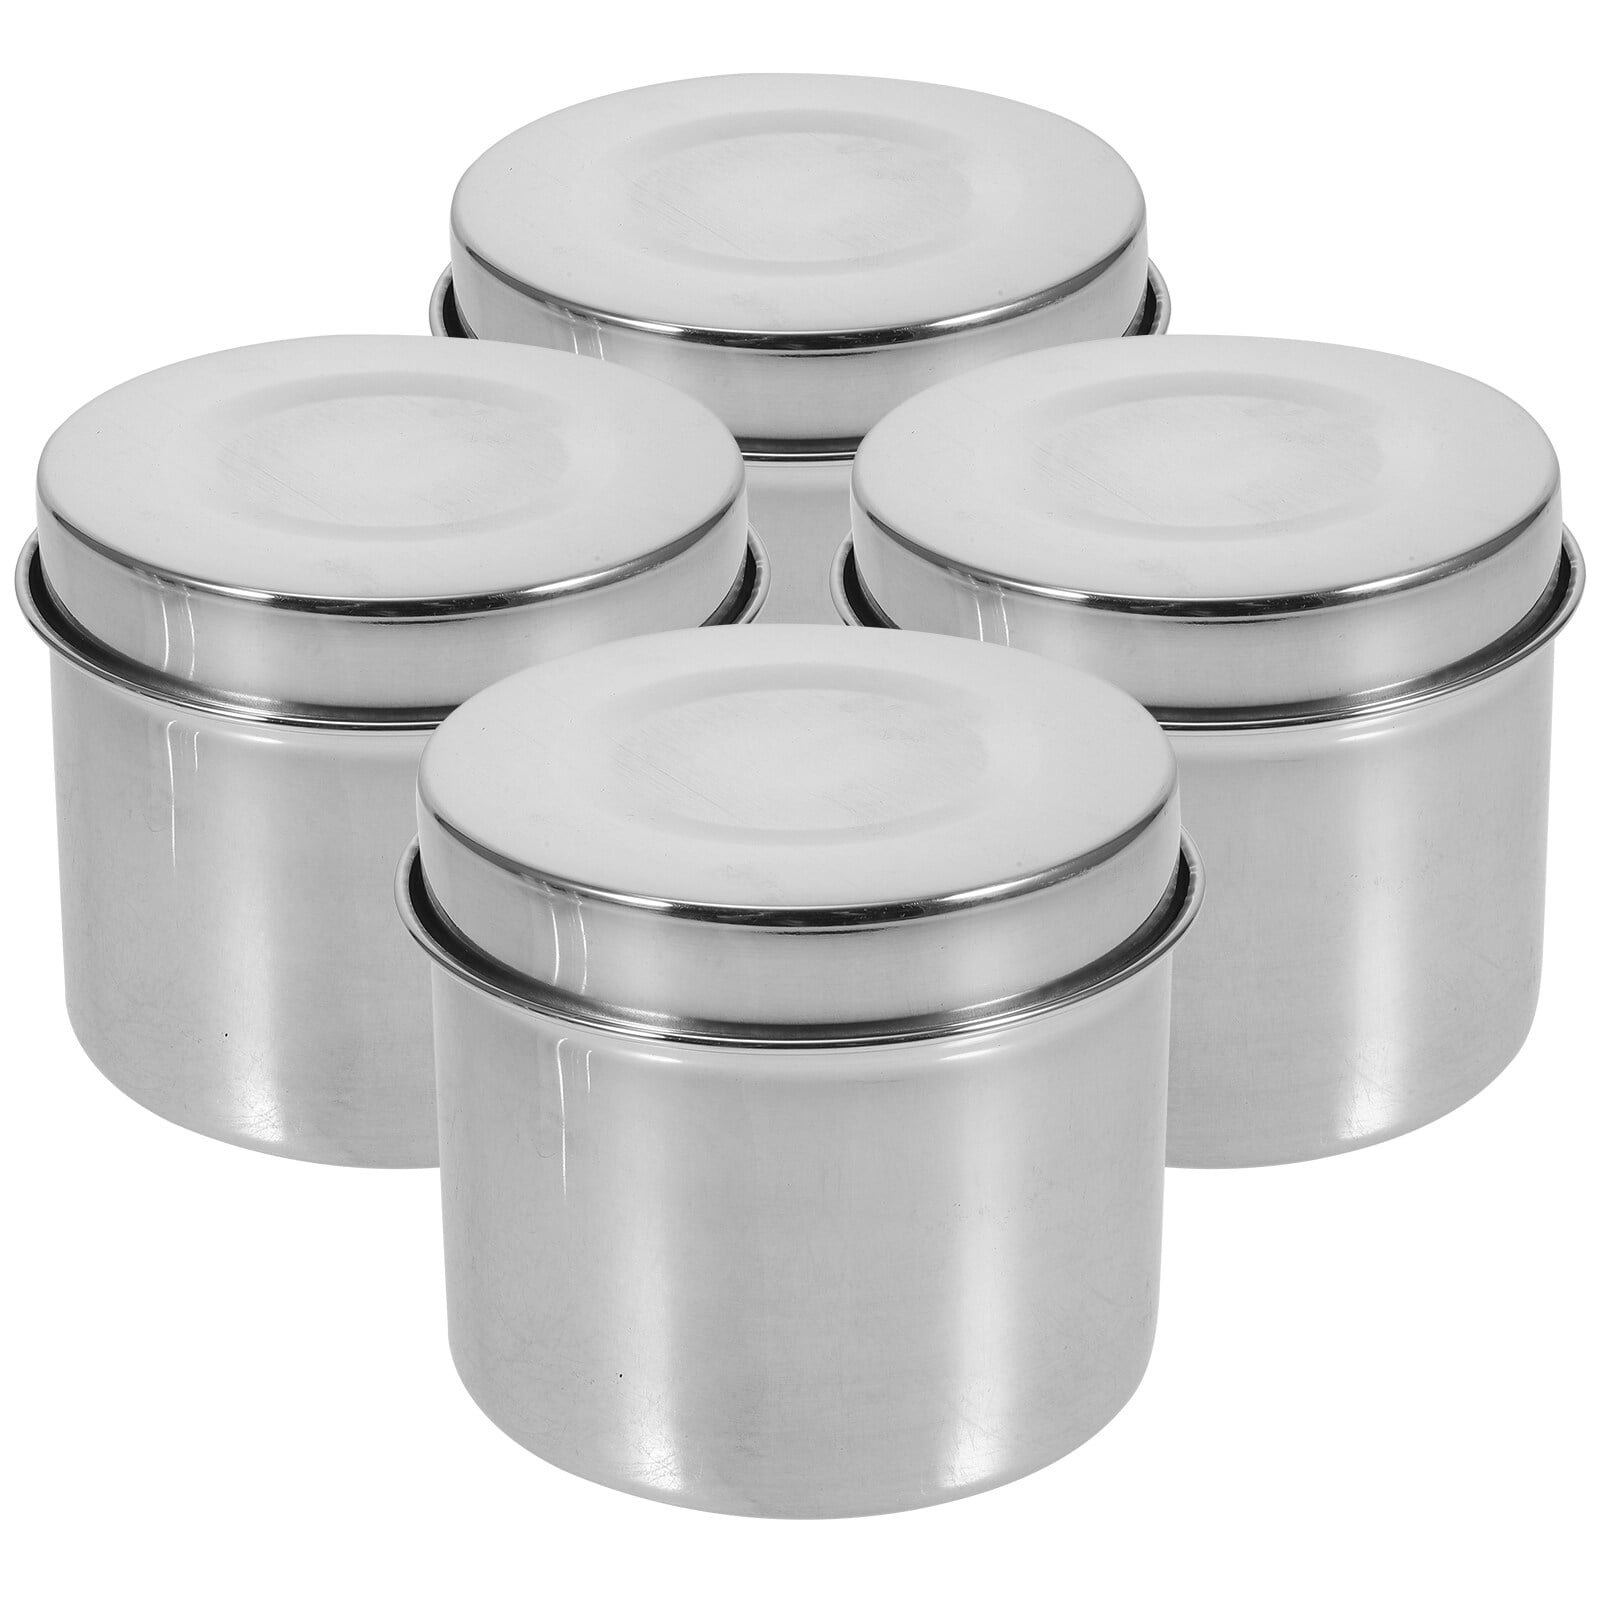 4Pack Stainless Steel Snack Containers, 6oz 304 Stainless Steel Metal Sauce  Food Storage Box Contain…See more 4Pack Stainless Steel Snack Containers